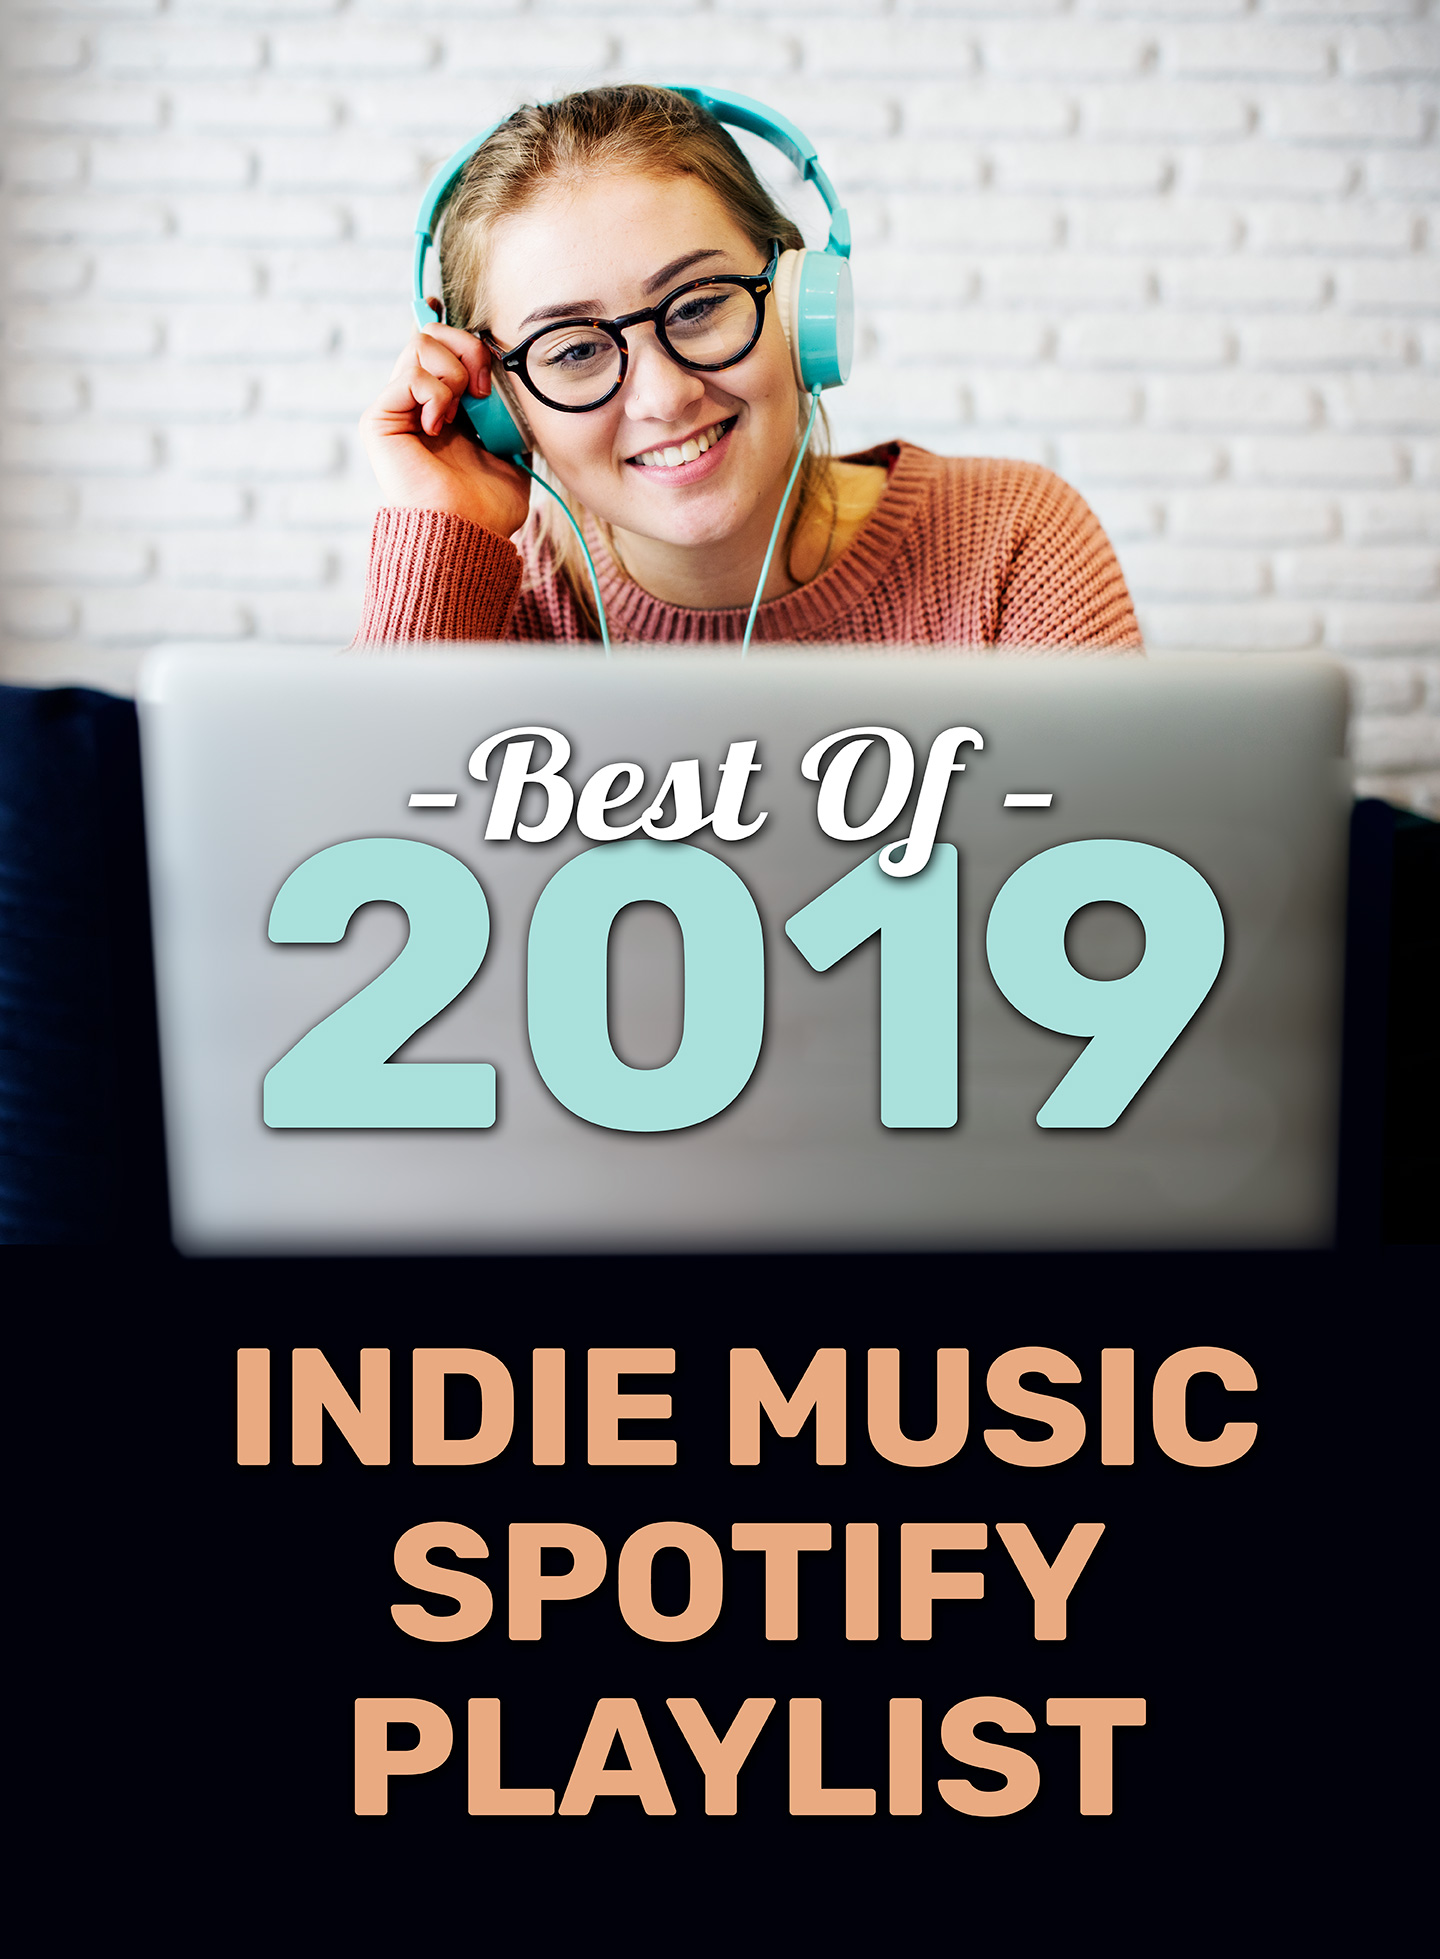 Best of 2019 - Spotify Playlist of the Best Indie & Alternative Music from This Year